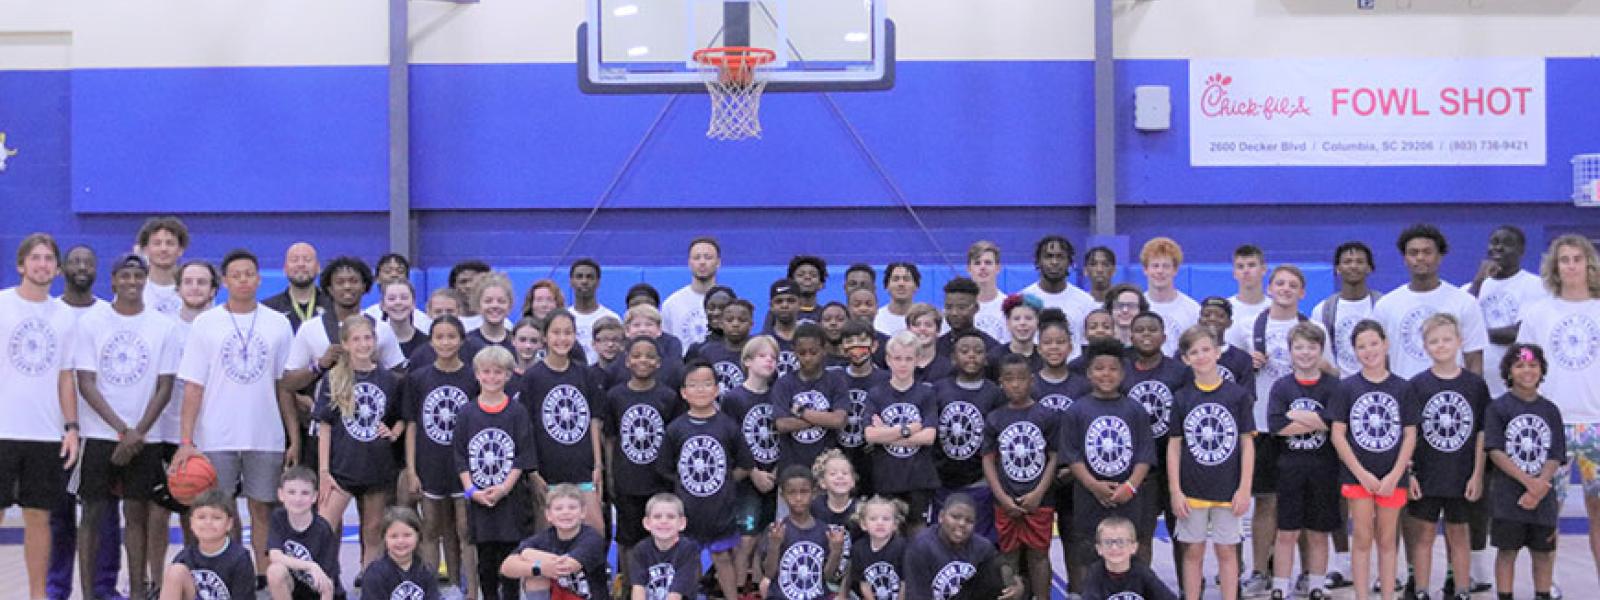 CIU basketball campers, players and coaches 